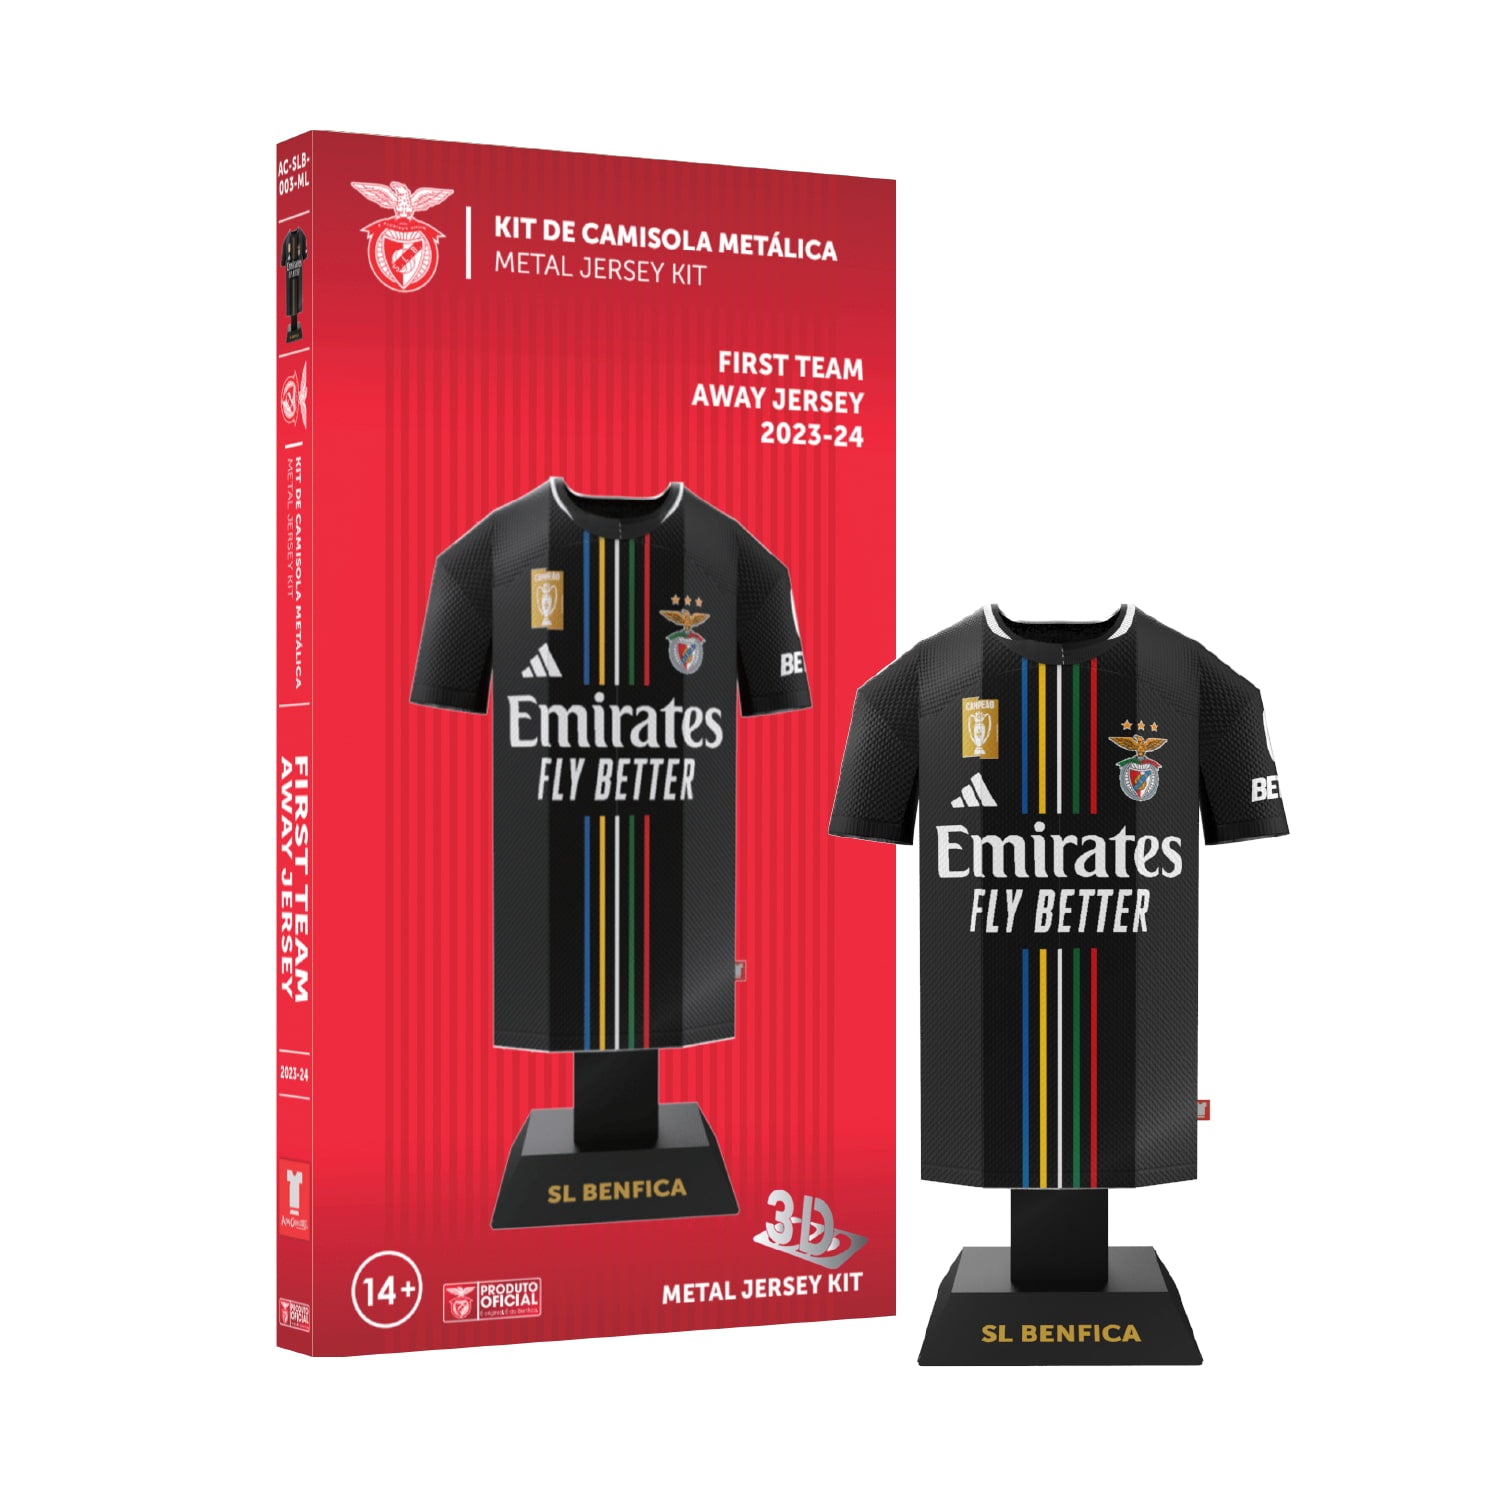 Benfica away kit main image with packaging